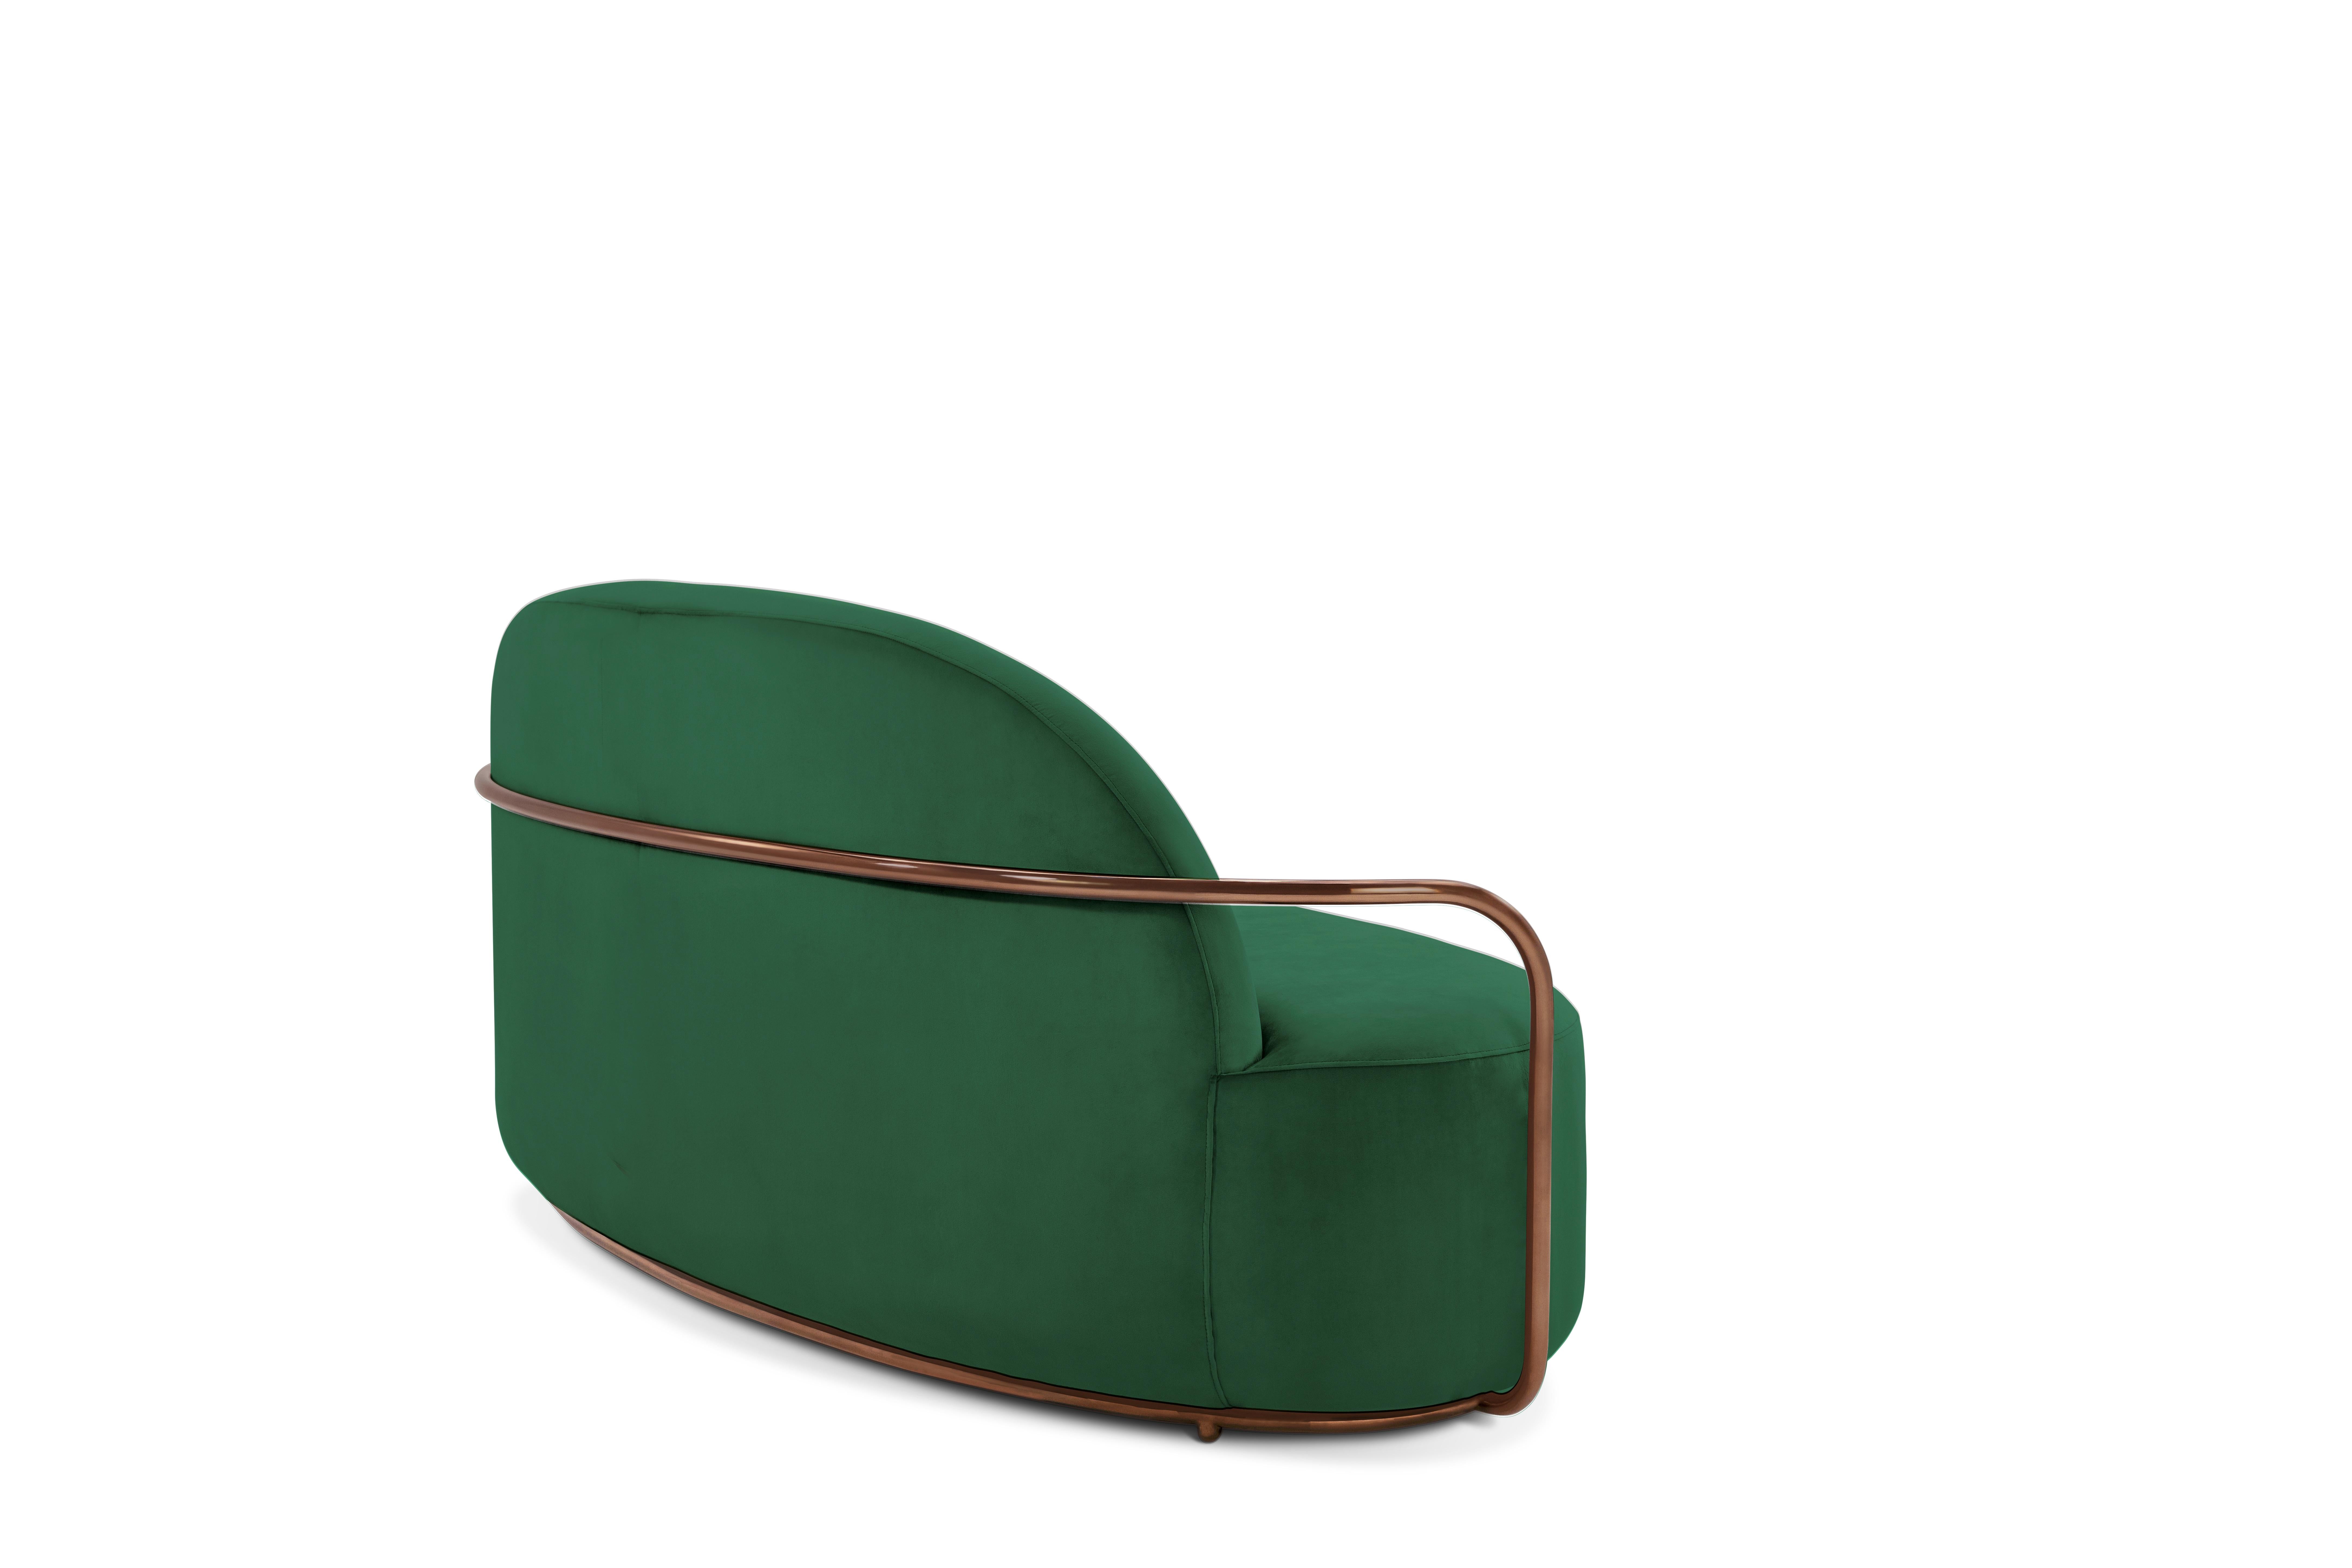 Hand-Crafted Orion 3 Seat Sofa with Plush Green Velvet and Rose Gold Arms by Nika Zupanc For Sale